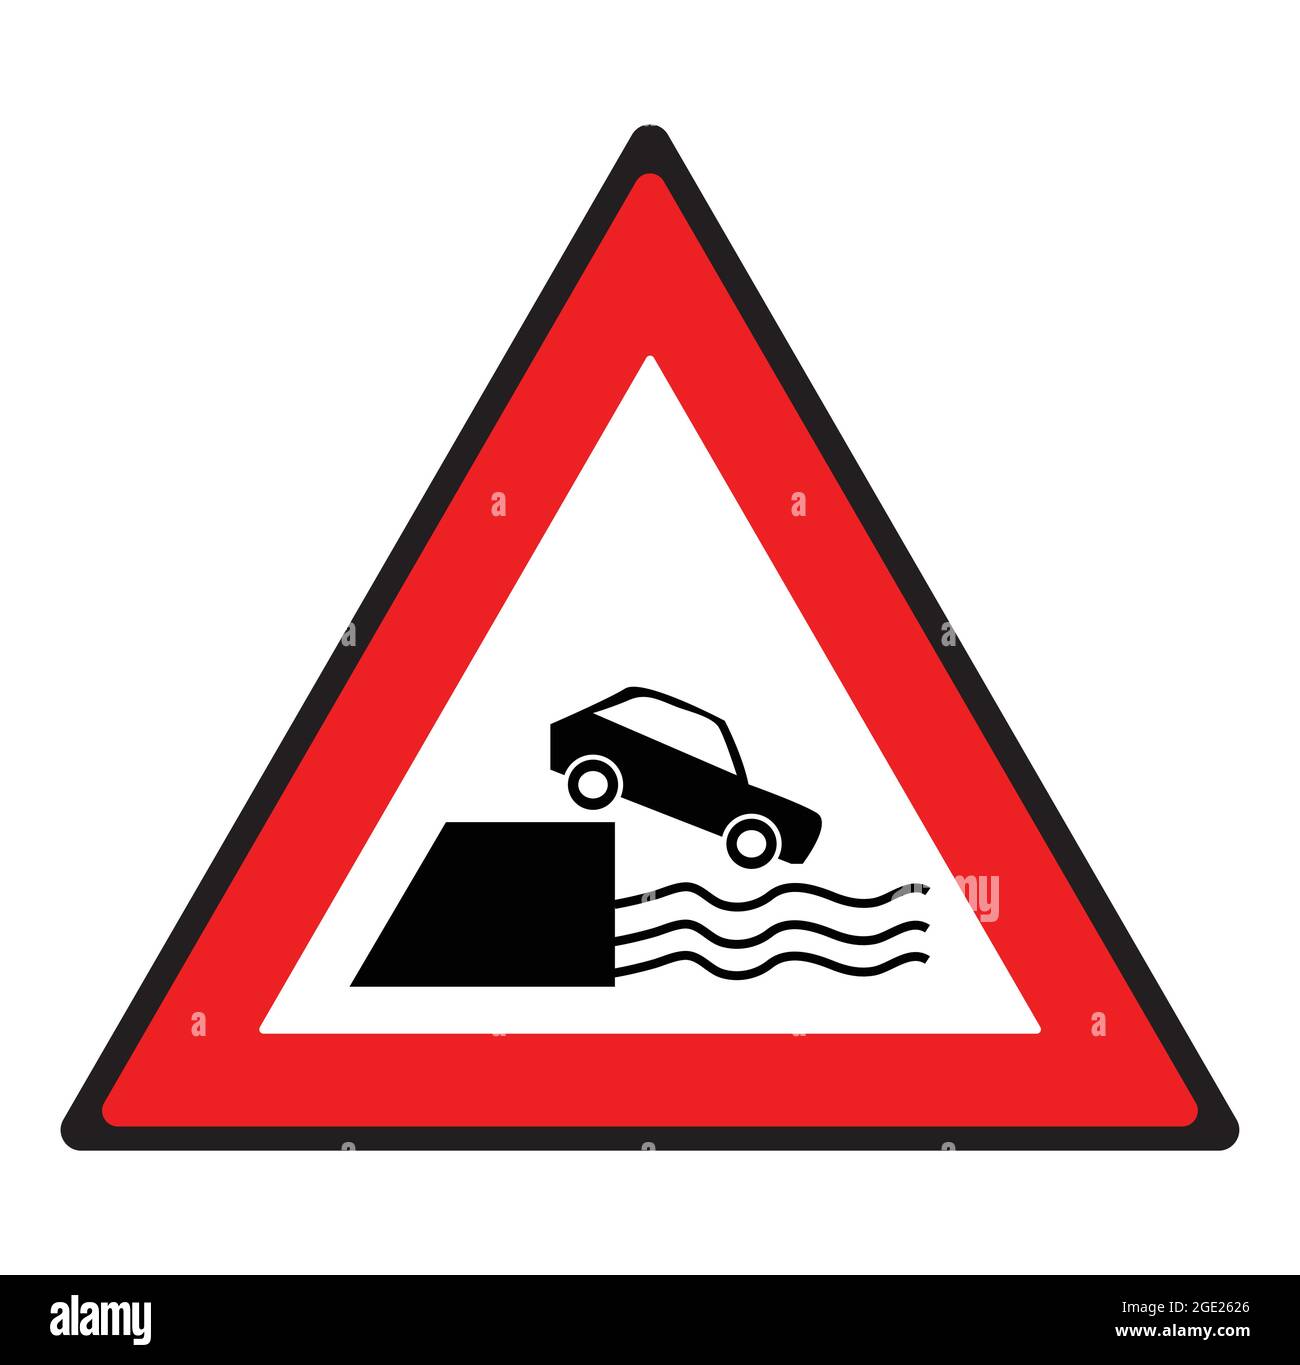 River bank road sign. Safety symbol. Stock Vector